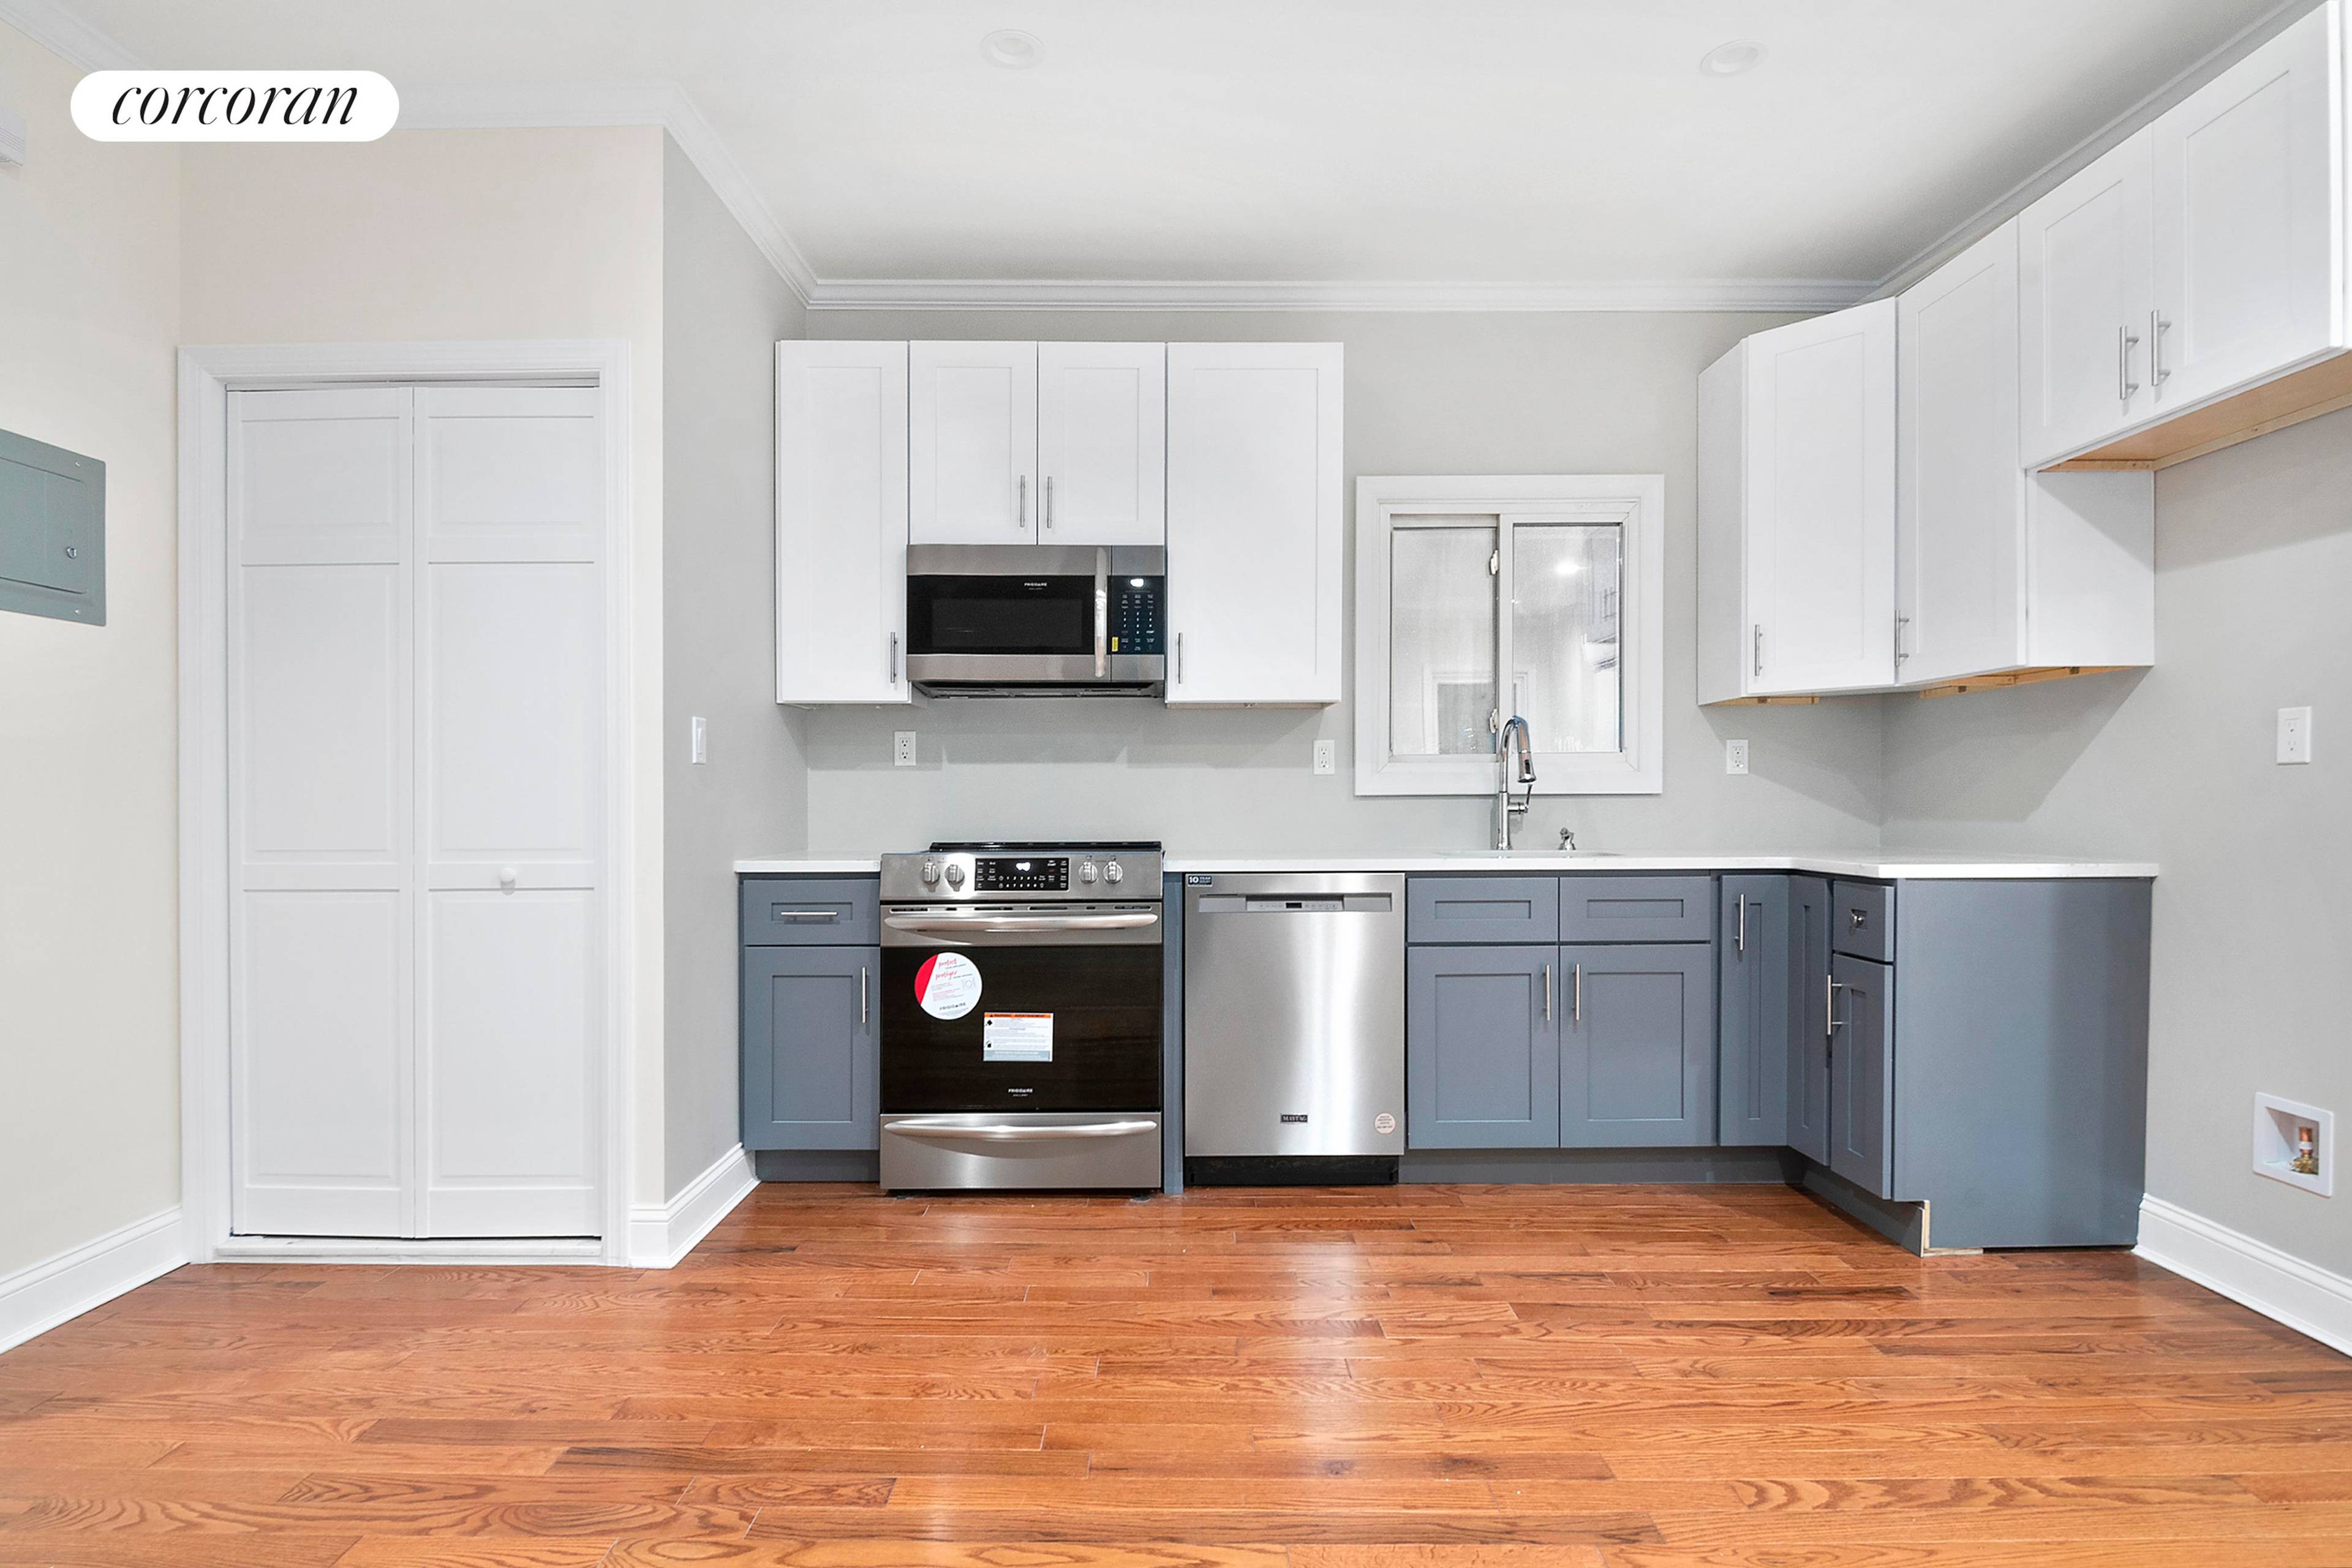 Tastefully renovated 3 BR, plus office den apartment in the heart of Bensonhurst ; conveniently located 84th Street, between Bay Parkway and 23rd Avenue ; just 2.